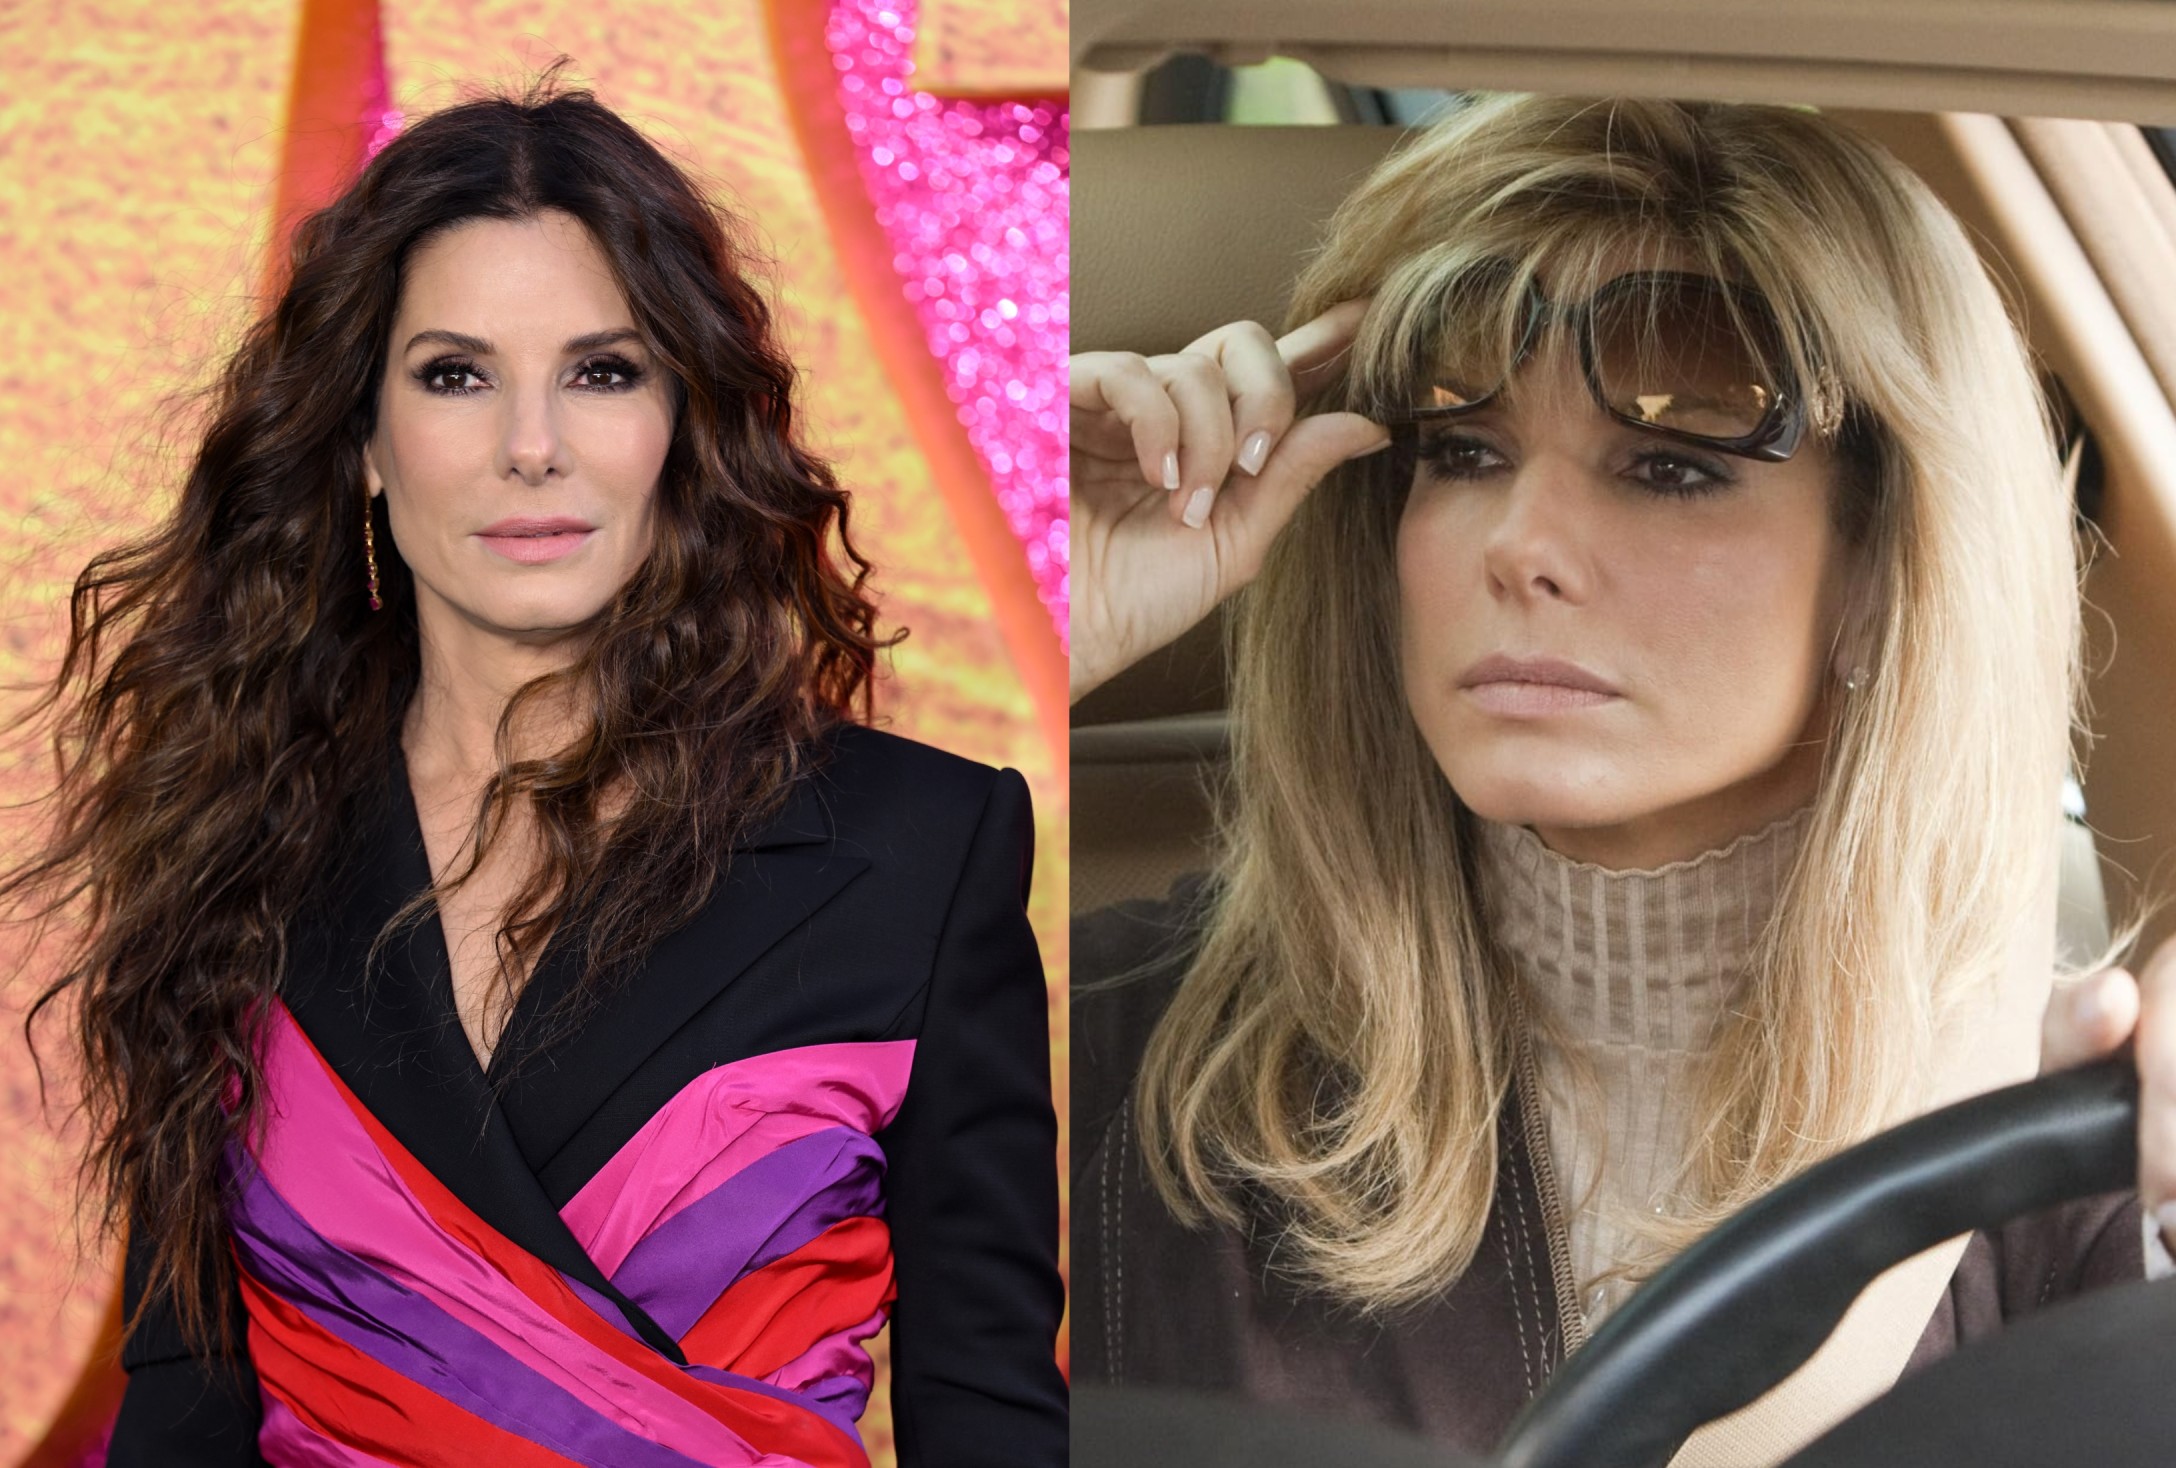 People want Sandra Bullock to return her 'The Blind Side' Oscar amid  Michael Oher scandal